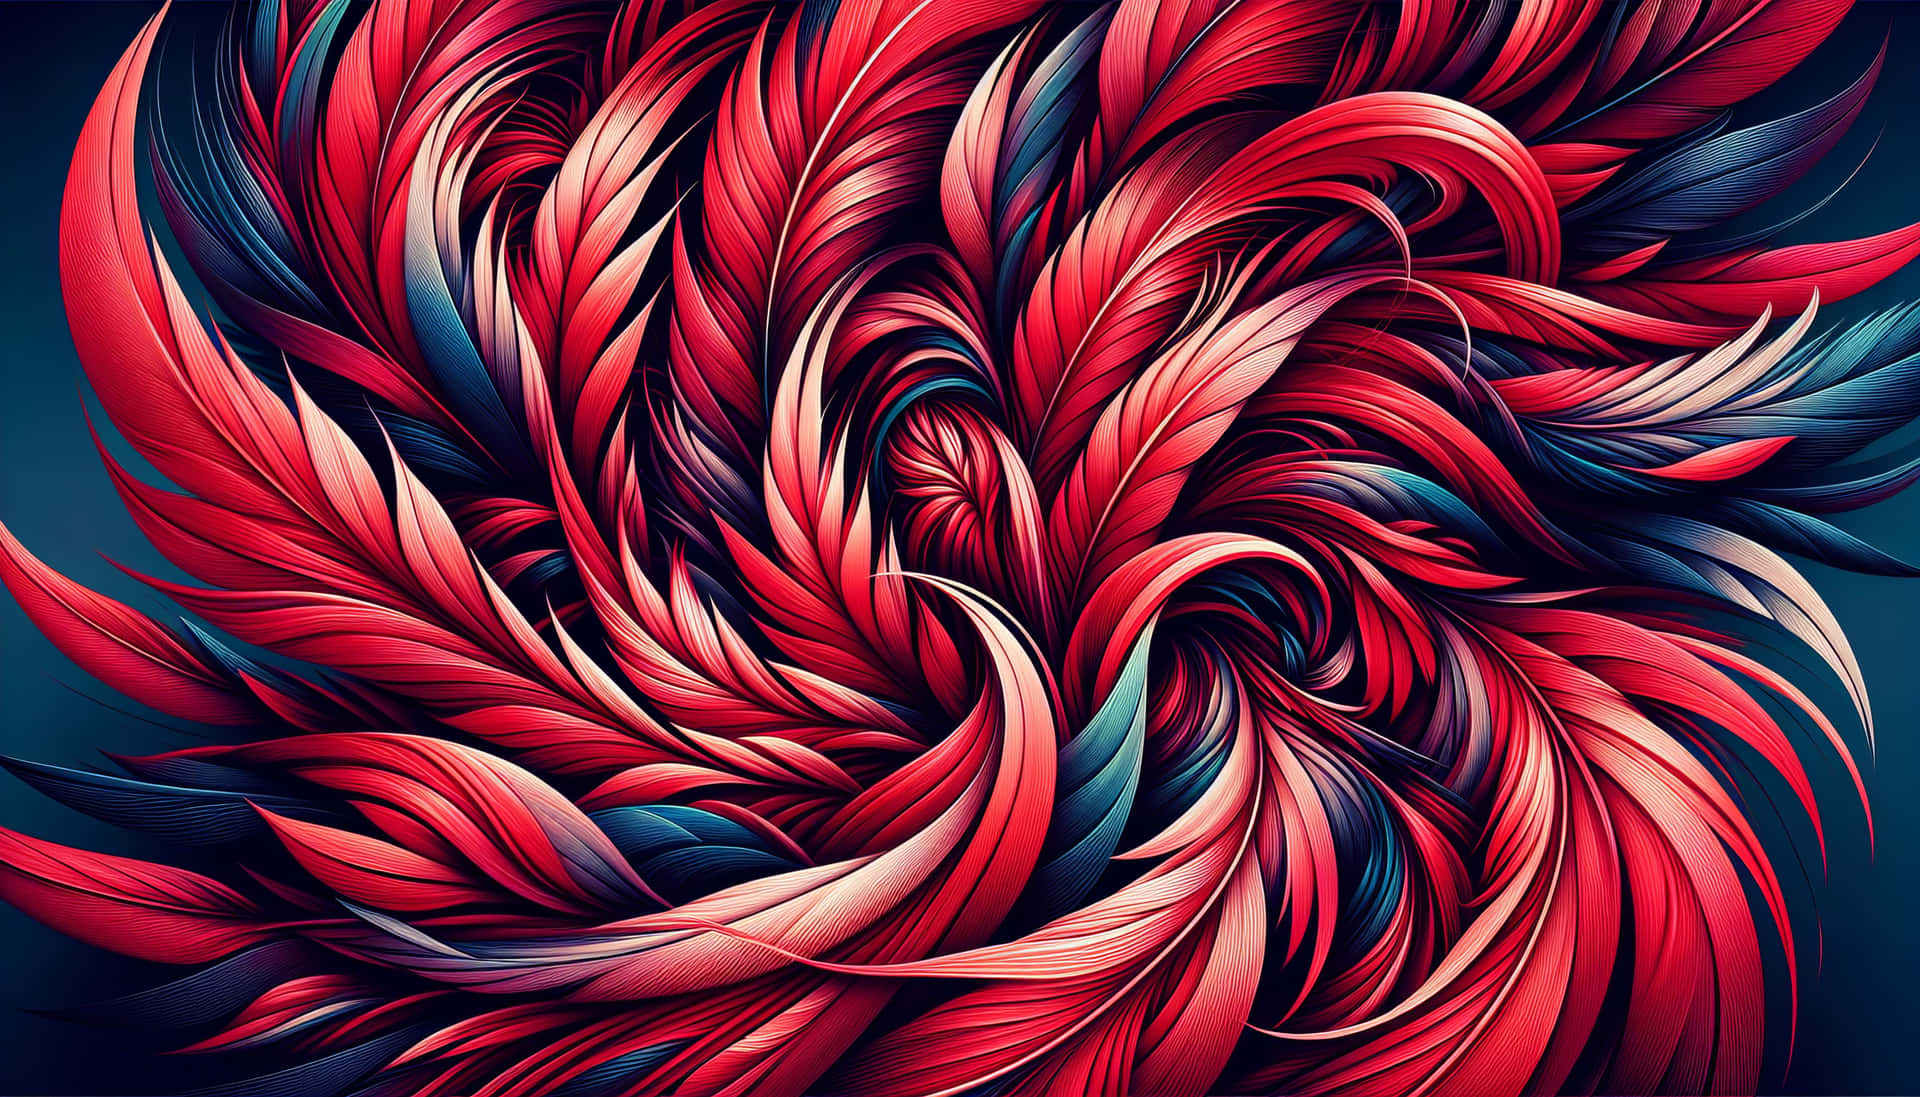 Abstract Feather Artwork Wallpaper